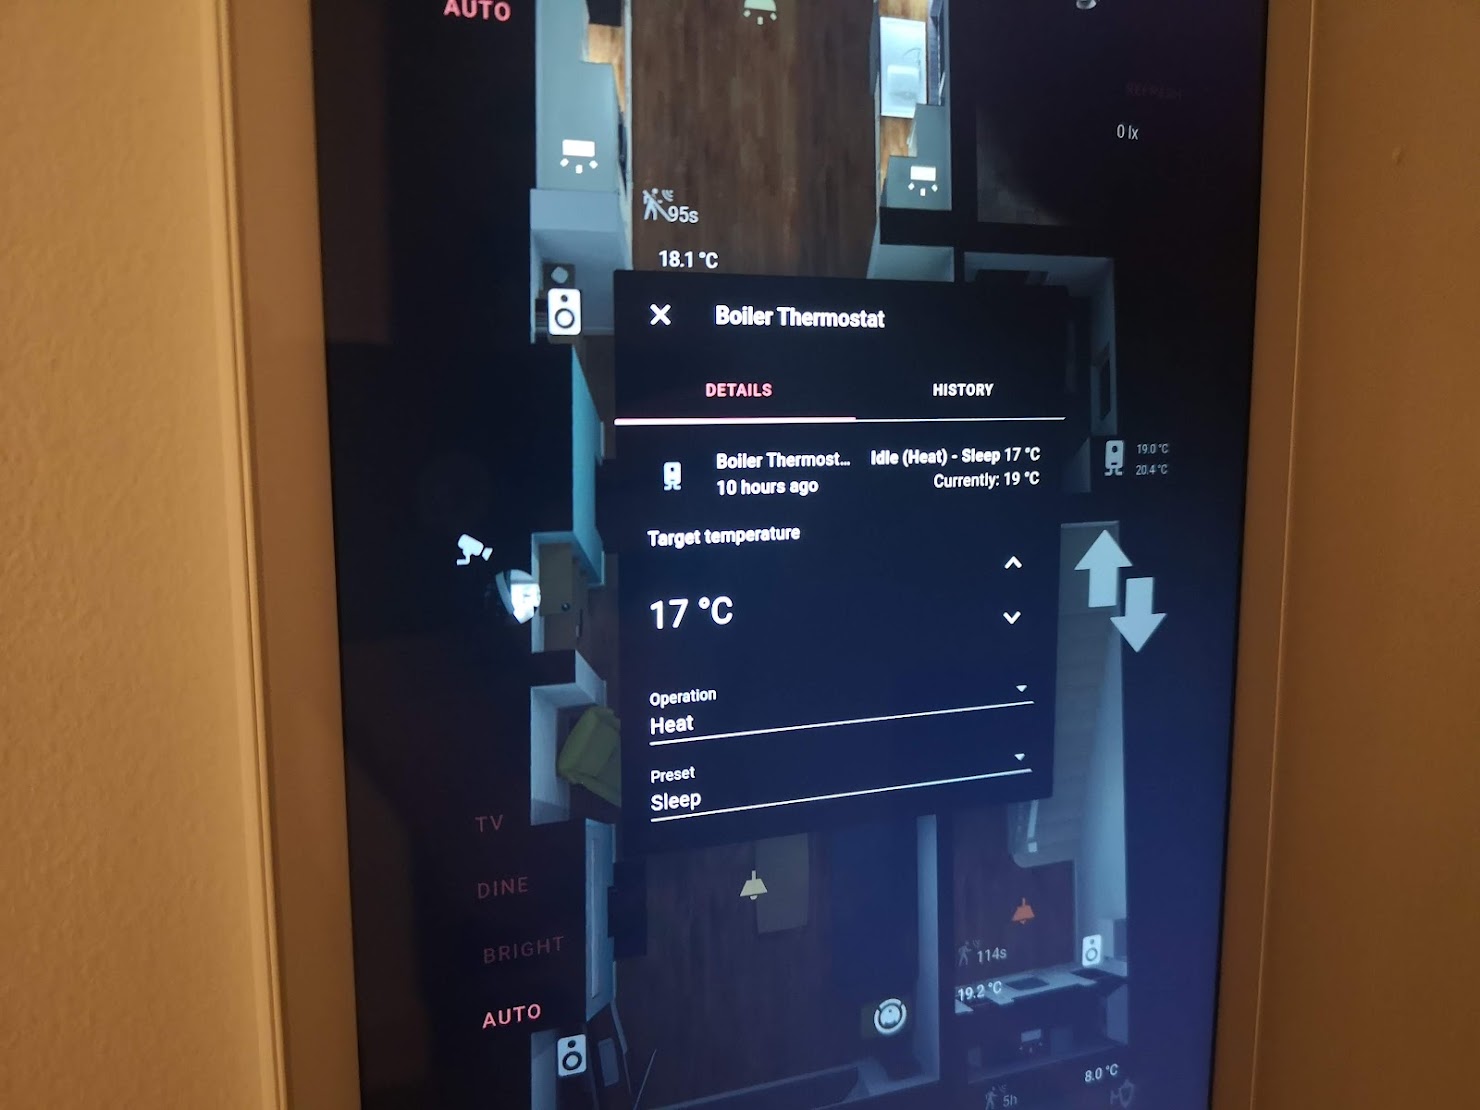 Thermostat controls in use on a Home Assistant wall panel